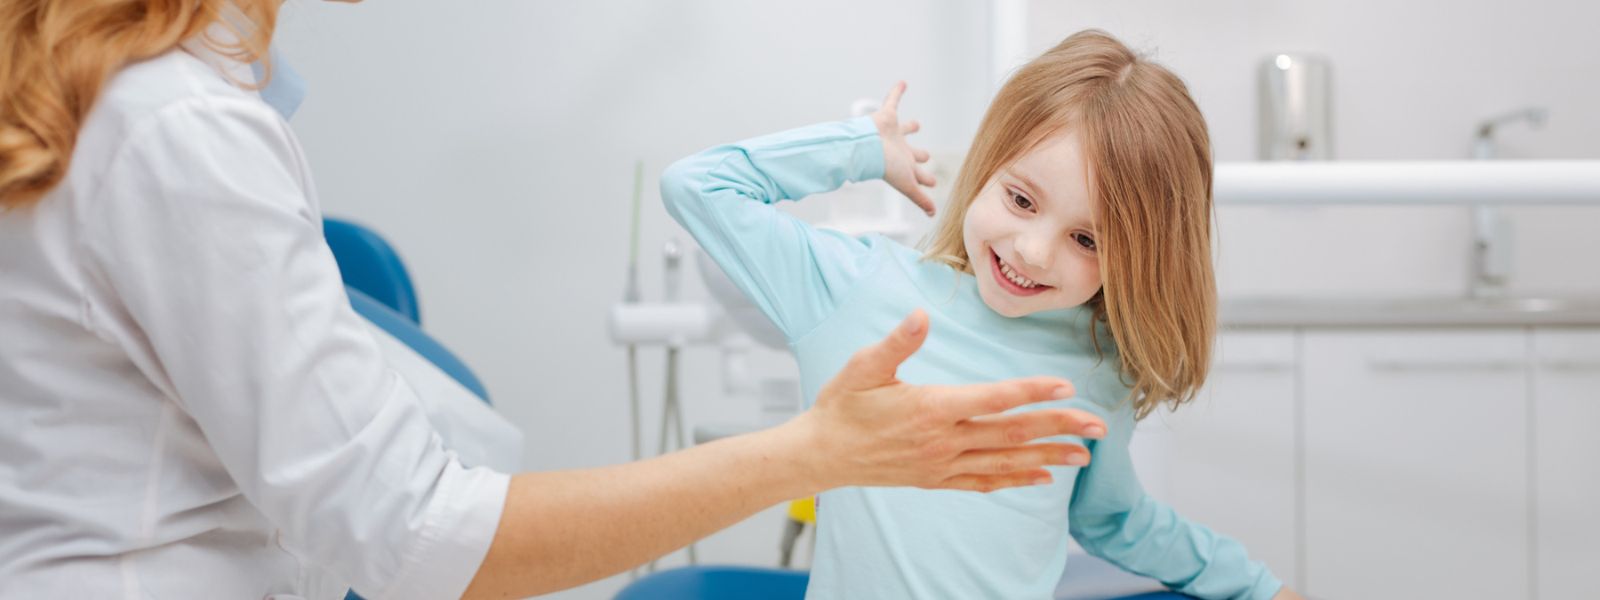 Small kid playing happily with Dentist